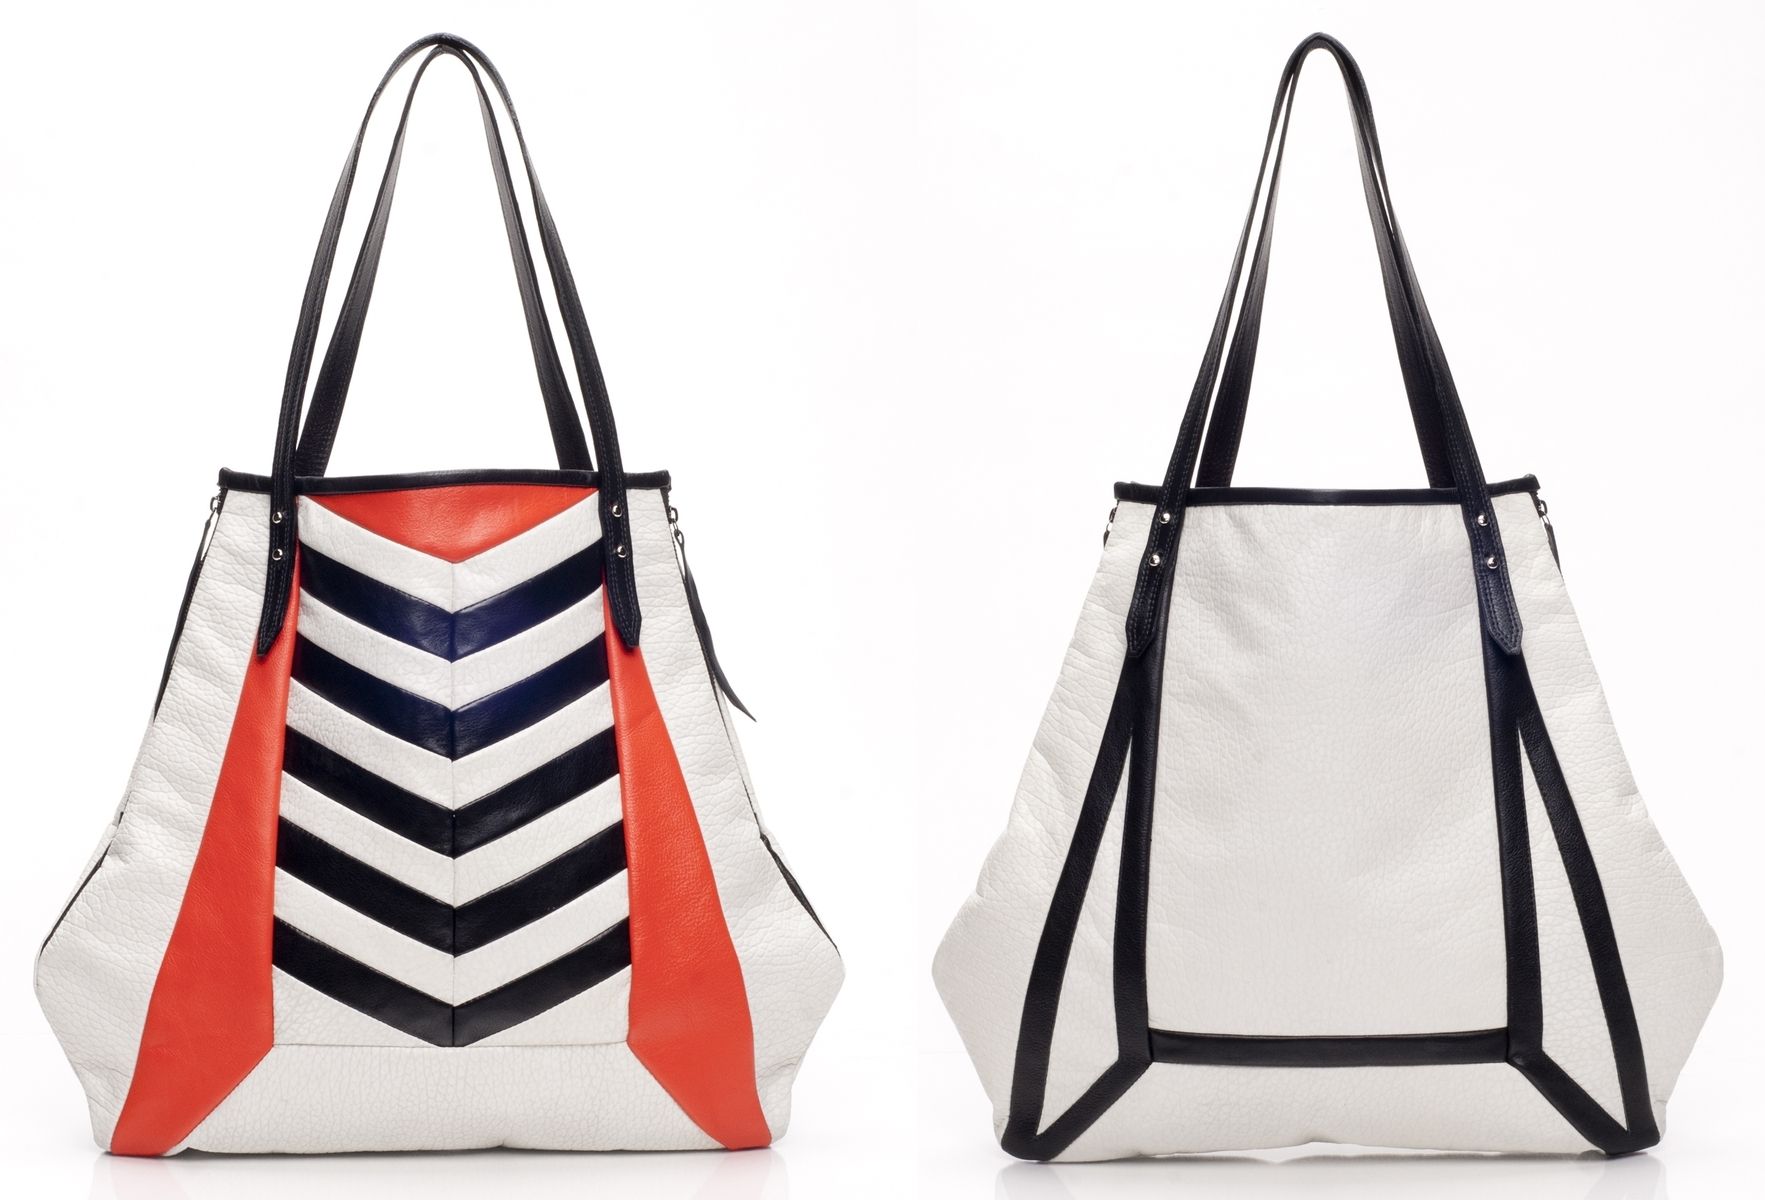 Hand Crafted Leather Shopper Tote With Chevron Stripes And Contrast ...